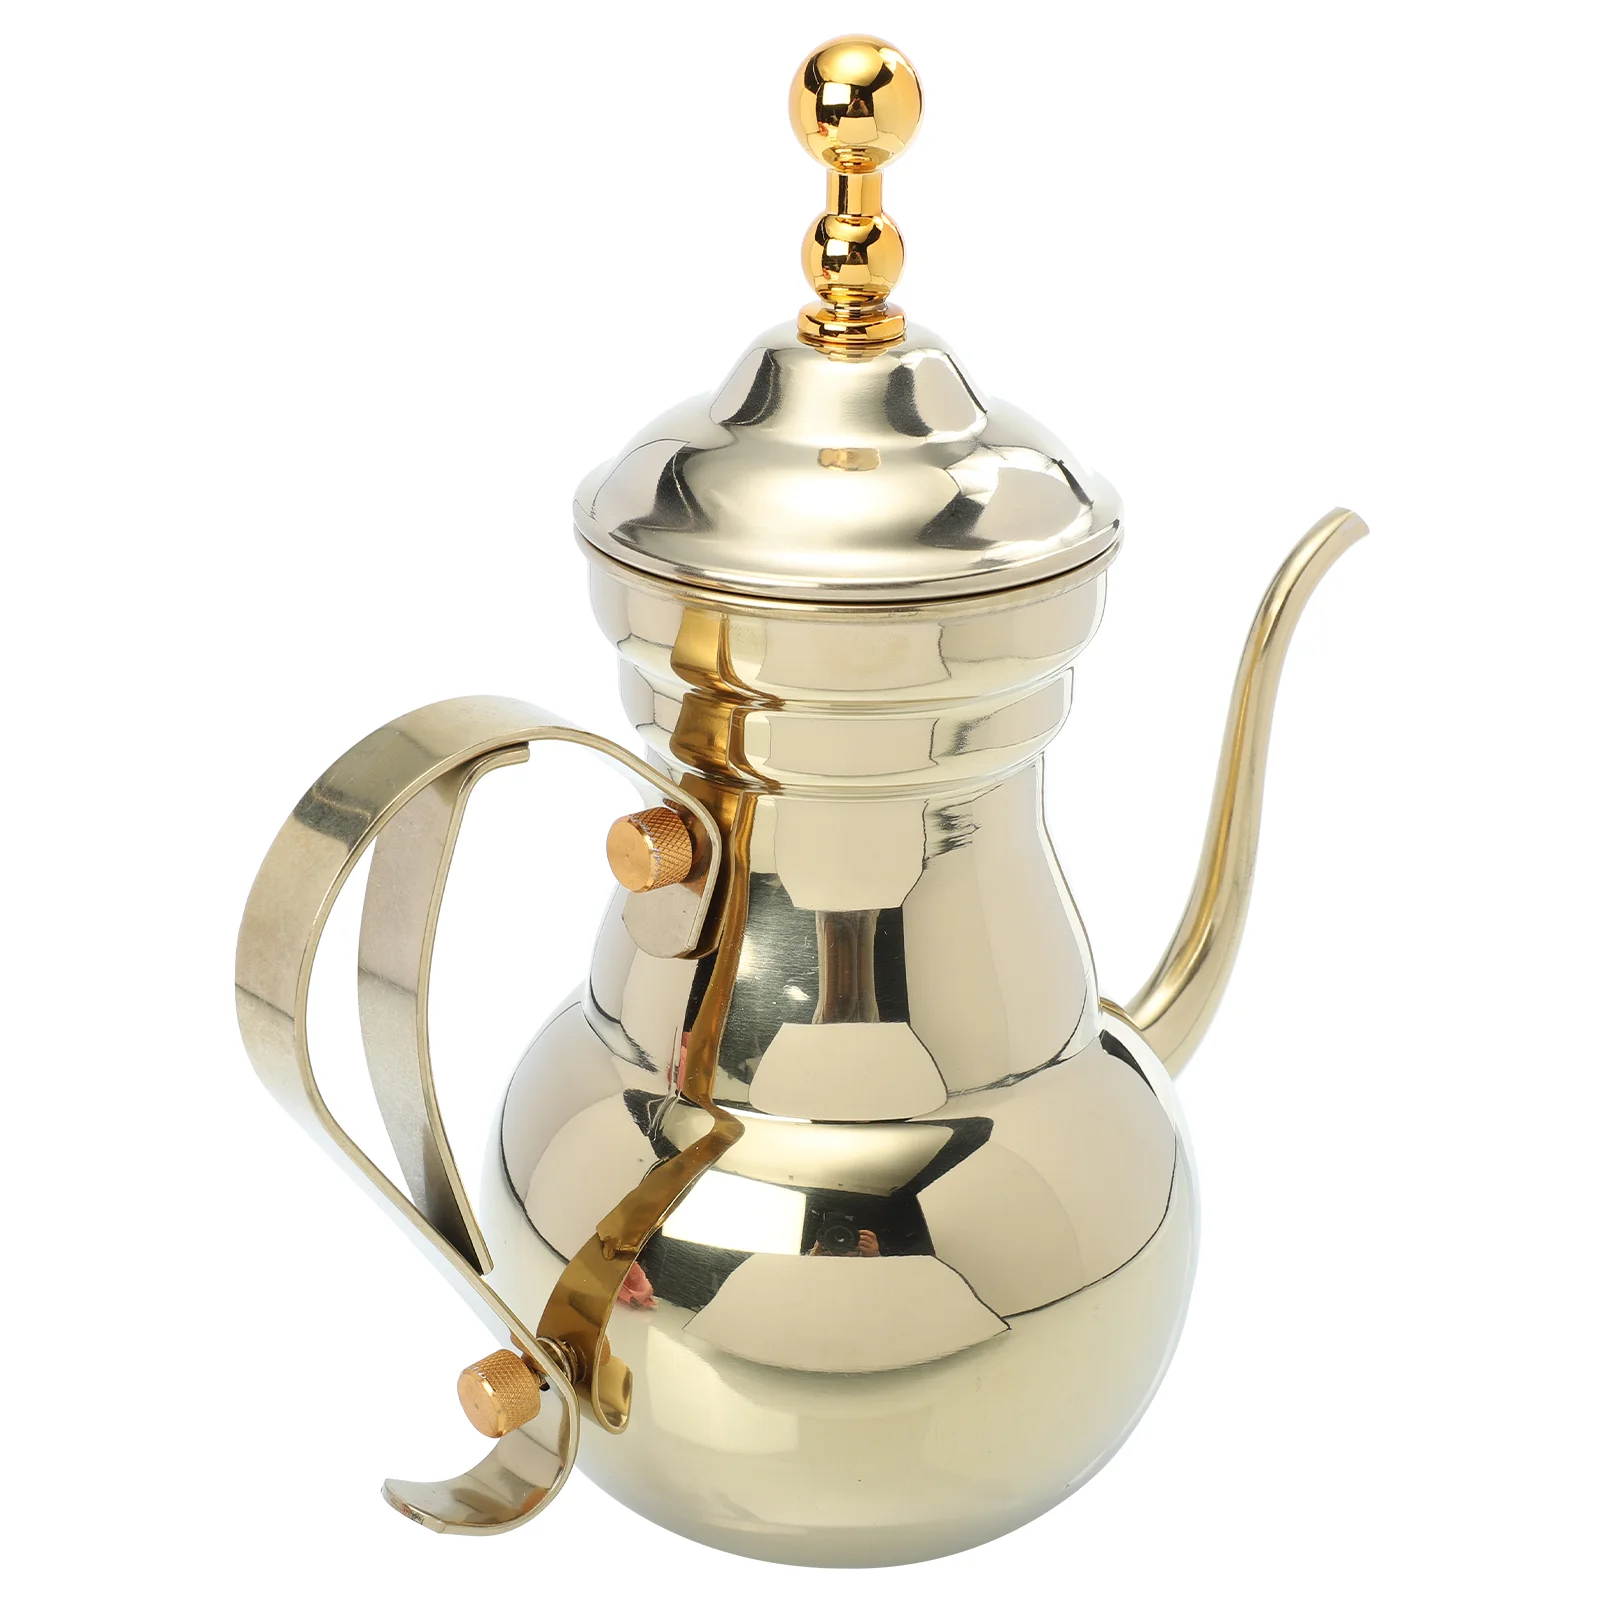 

Kettle Coffee Tea Pot Water Gooseneck Teapot Stainless Pour Steel Over Drink Cold Pitcher Spout Arabic Stovetop Maker Turkish